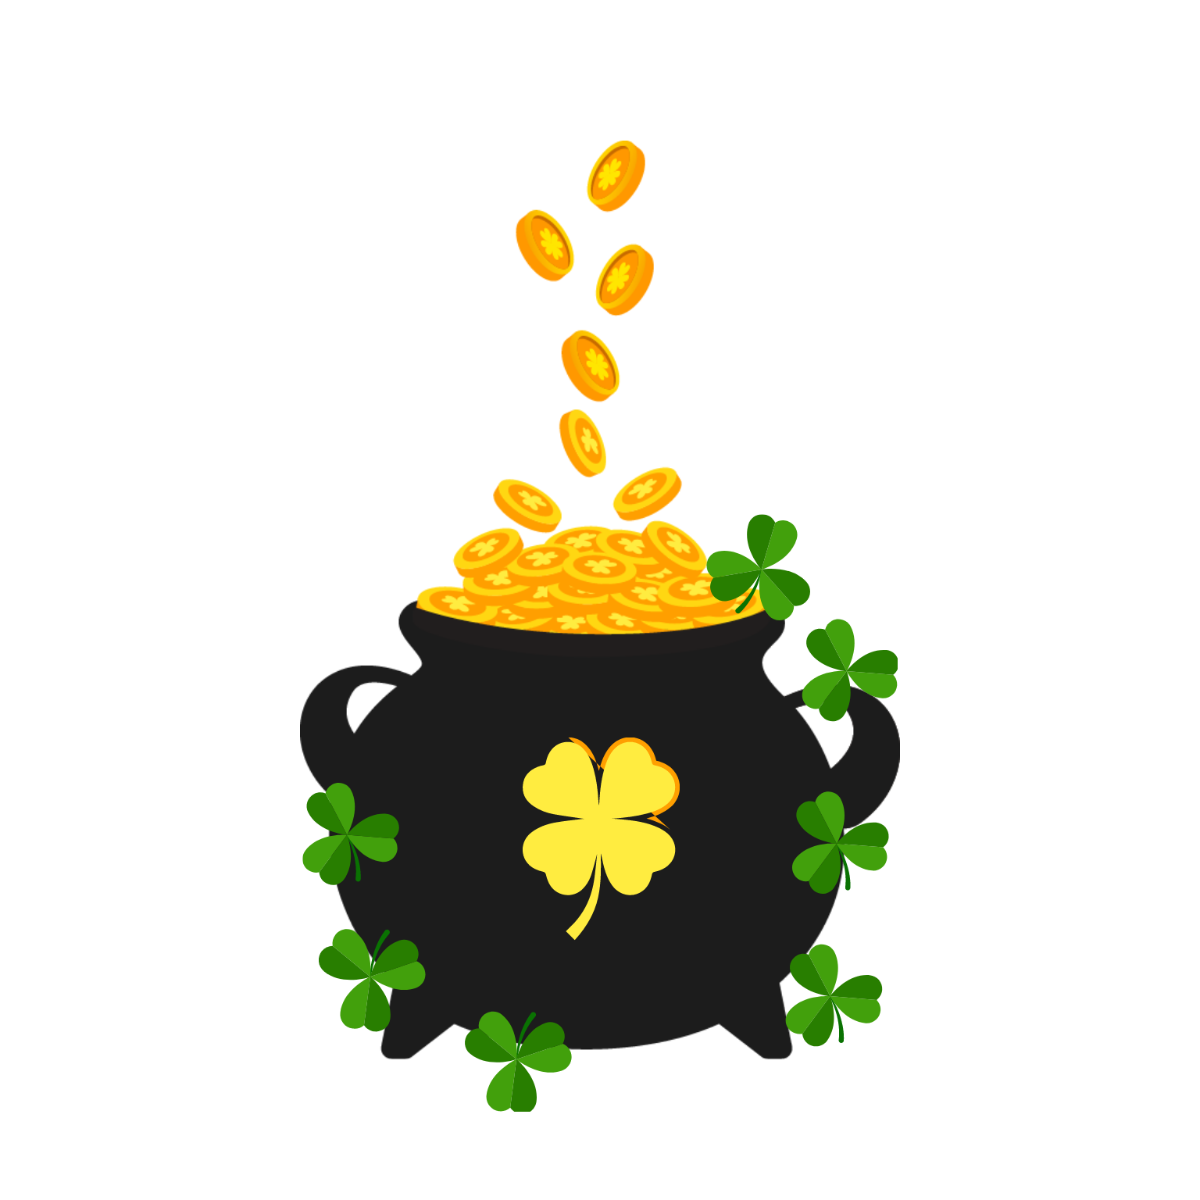 Gold St. Patrick's Day Vector